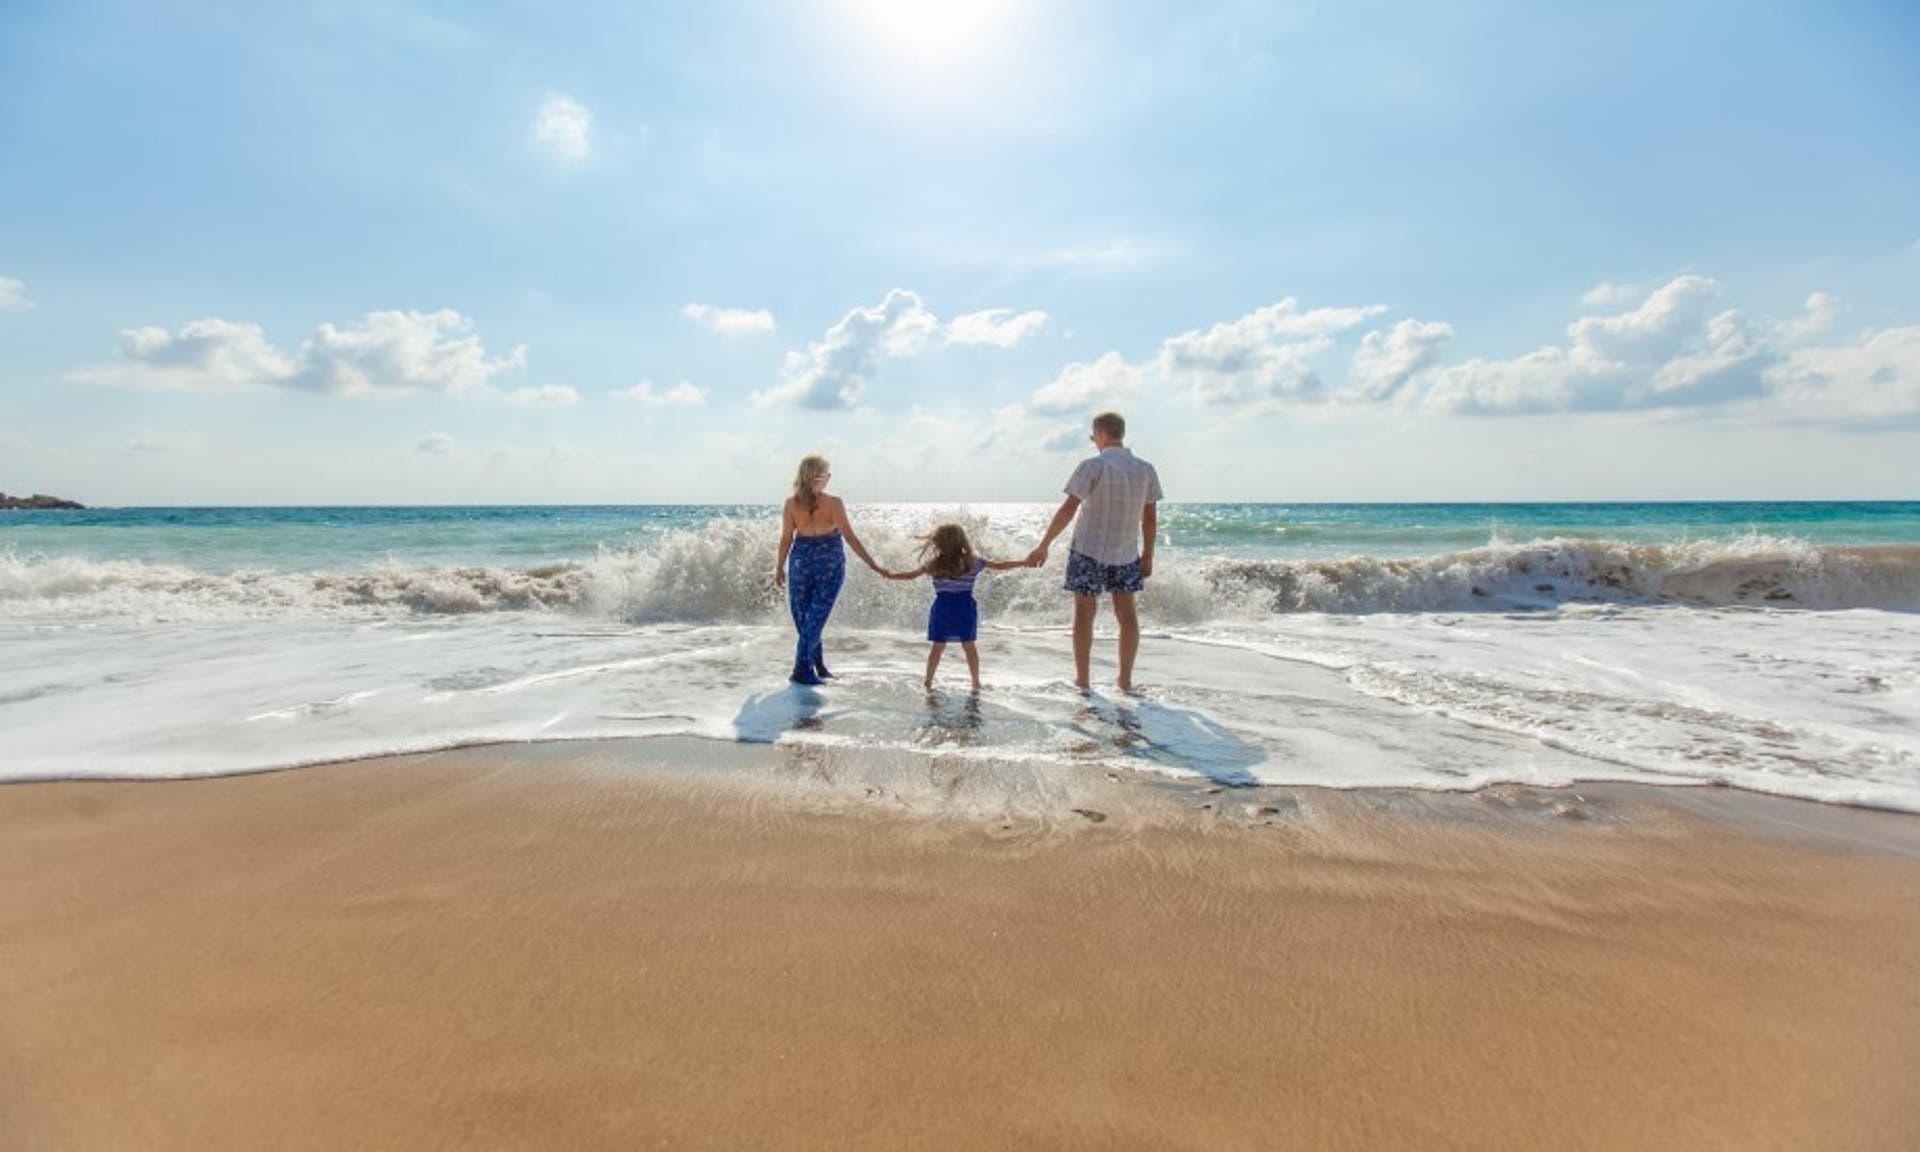  man, woman and young child paddling in shallow water on a sunny beach 